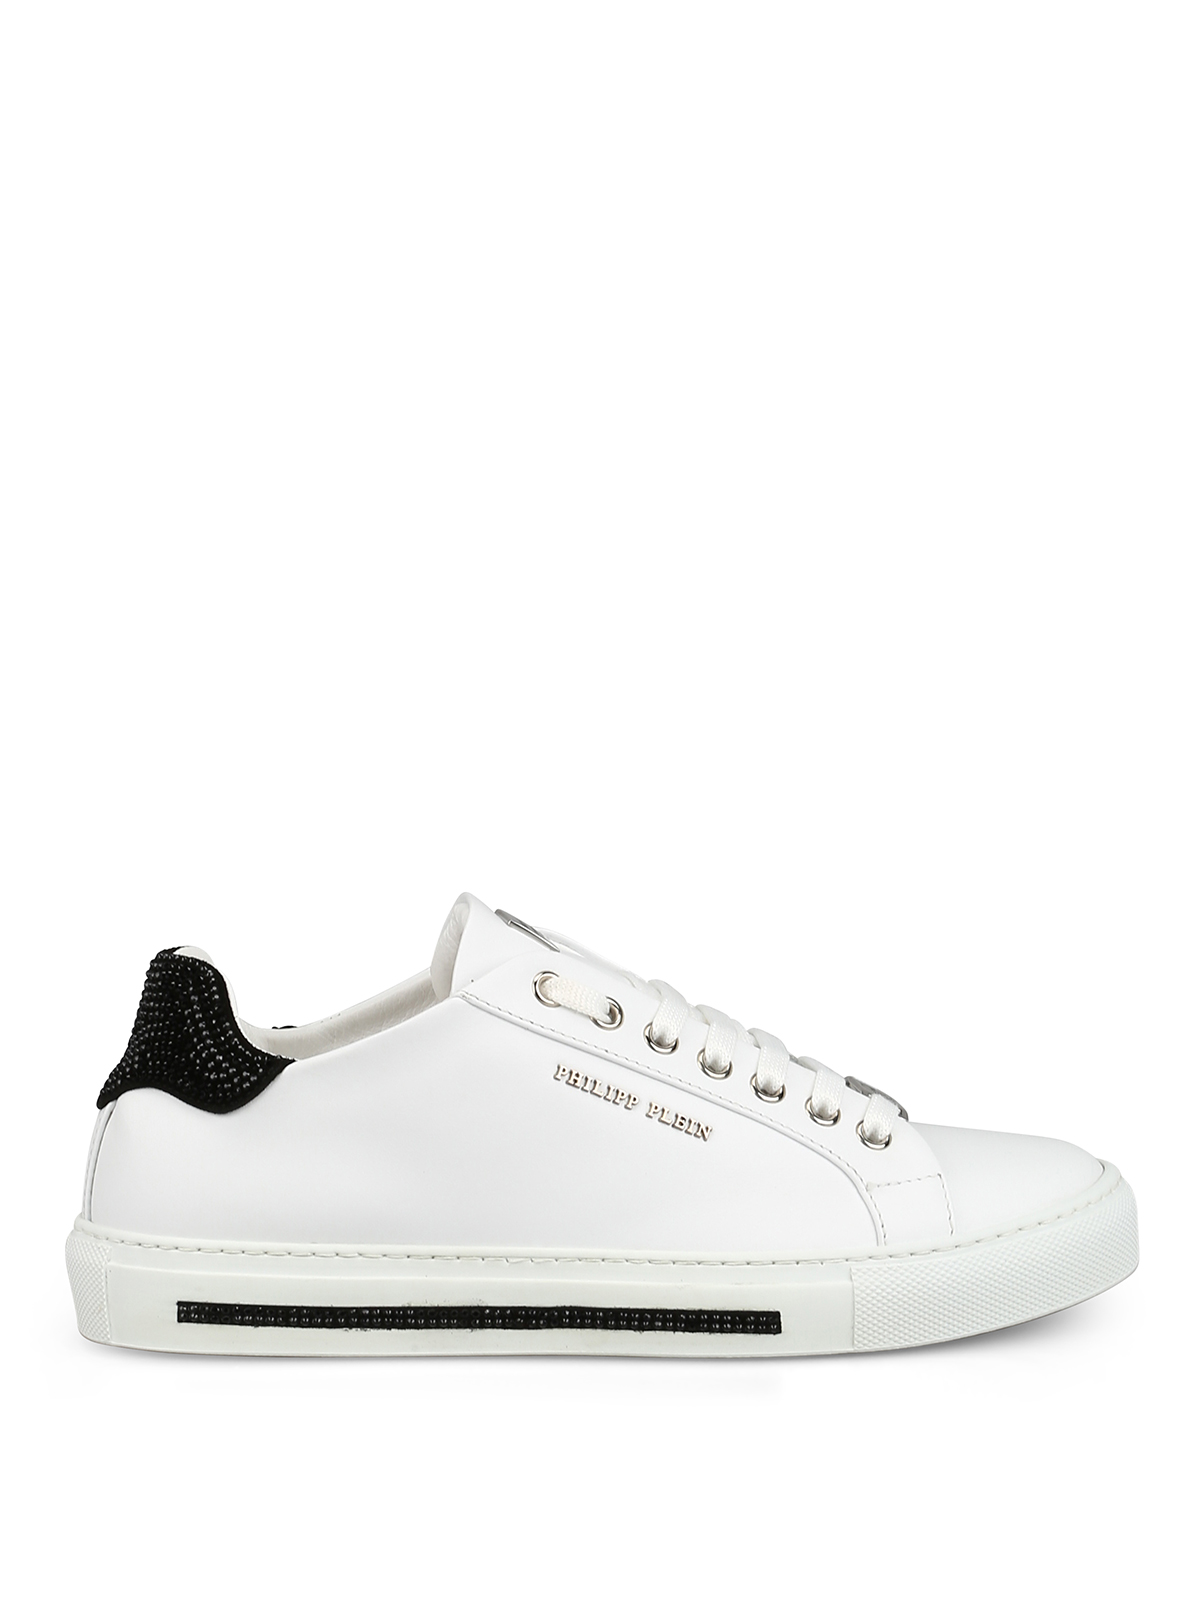 Philipp Plein crystal-embellished low-top sneakers - White